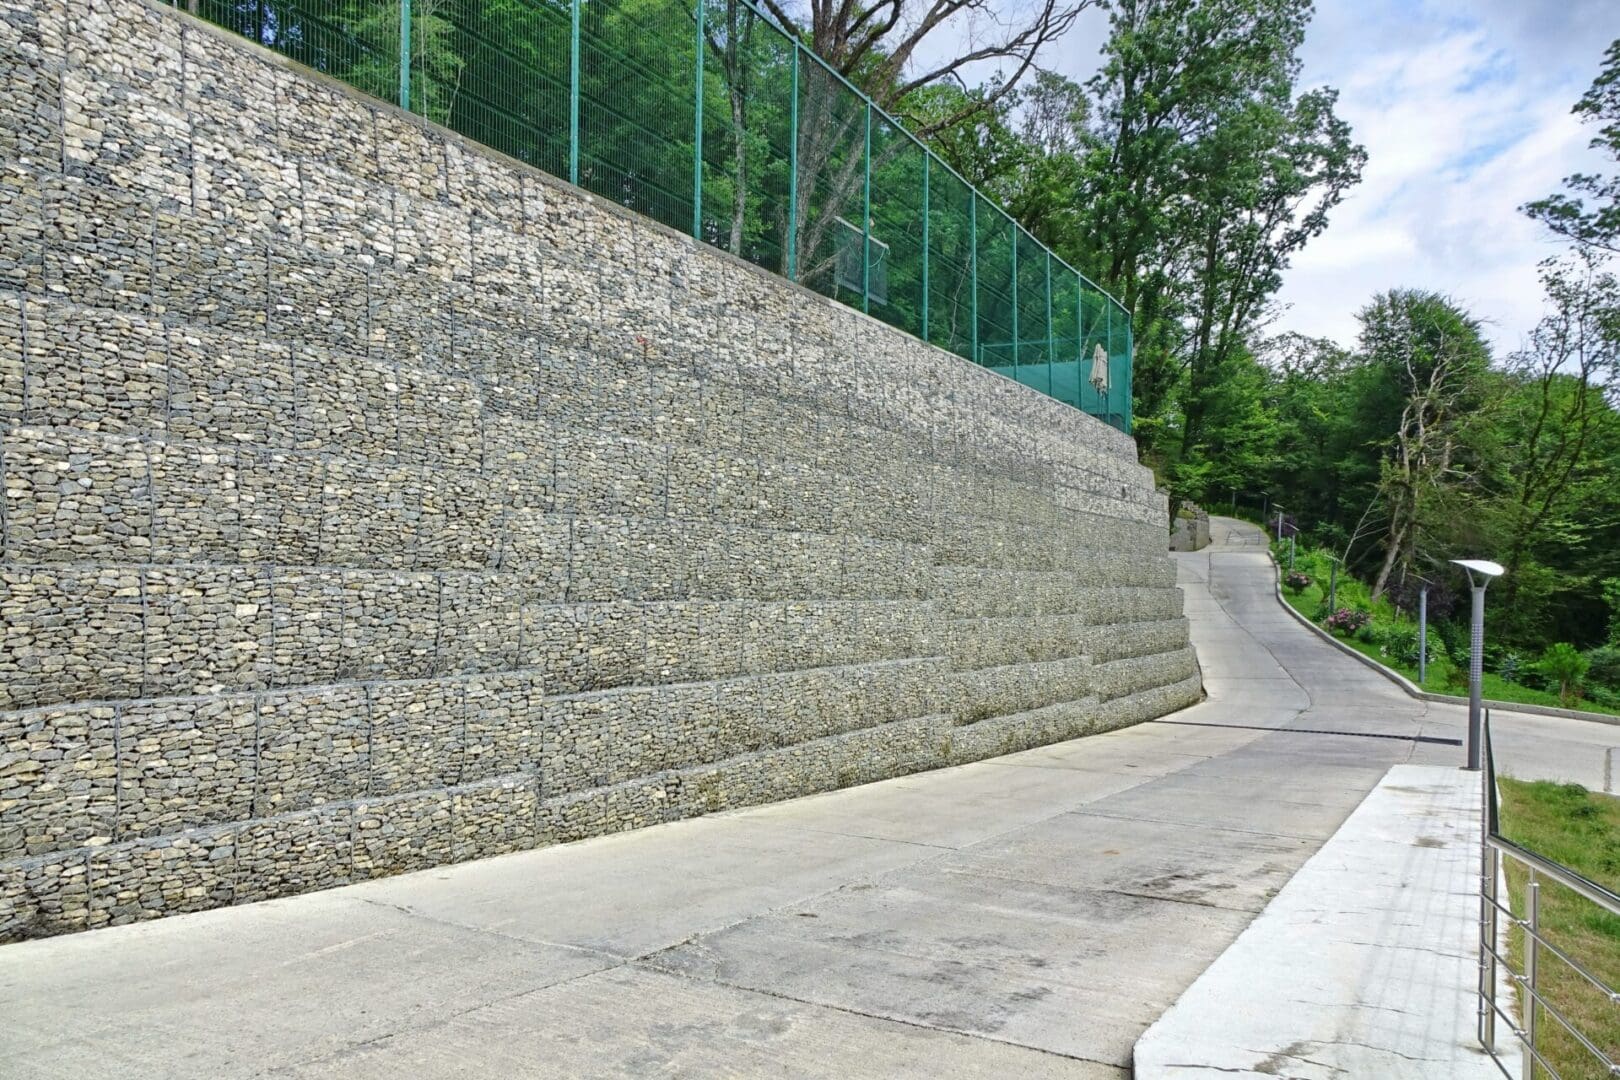 A stone wall with a green fence on the side.